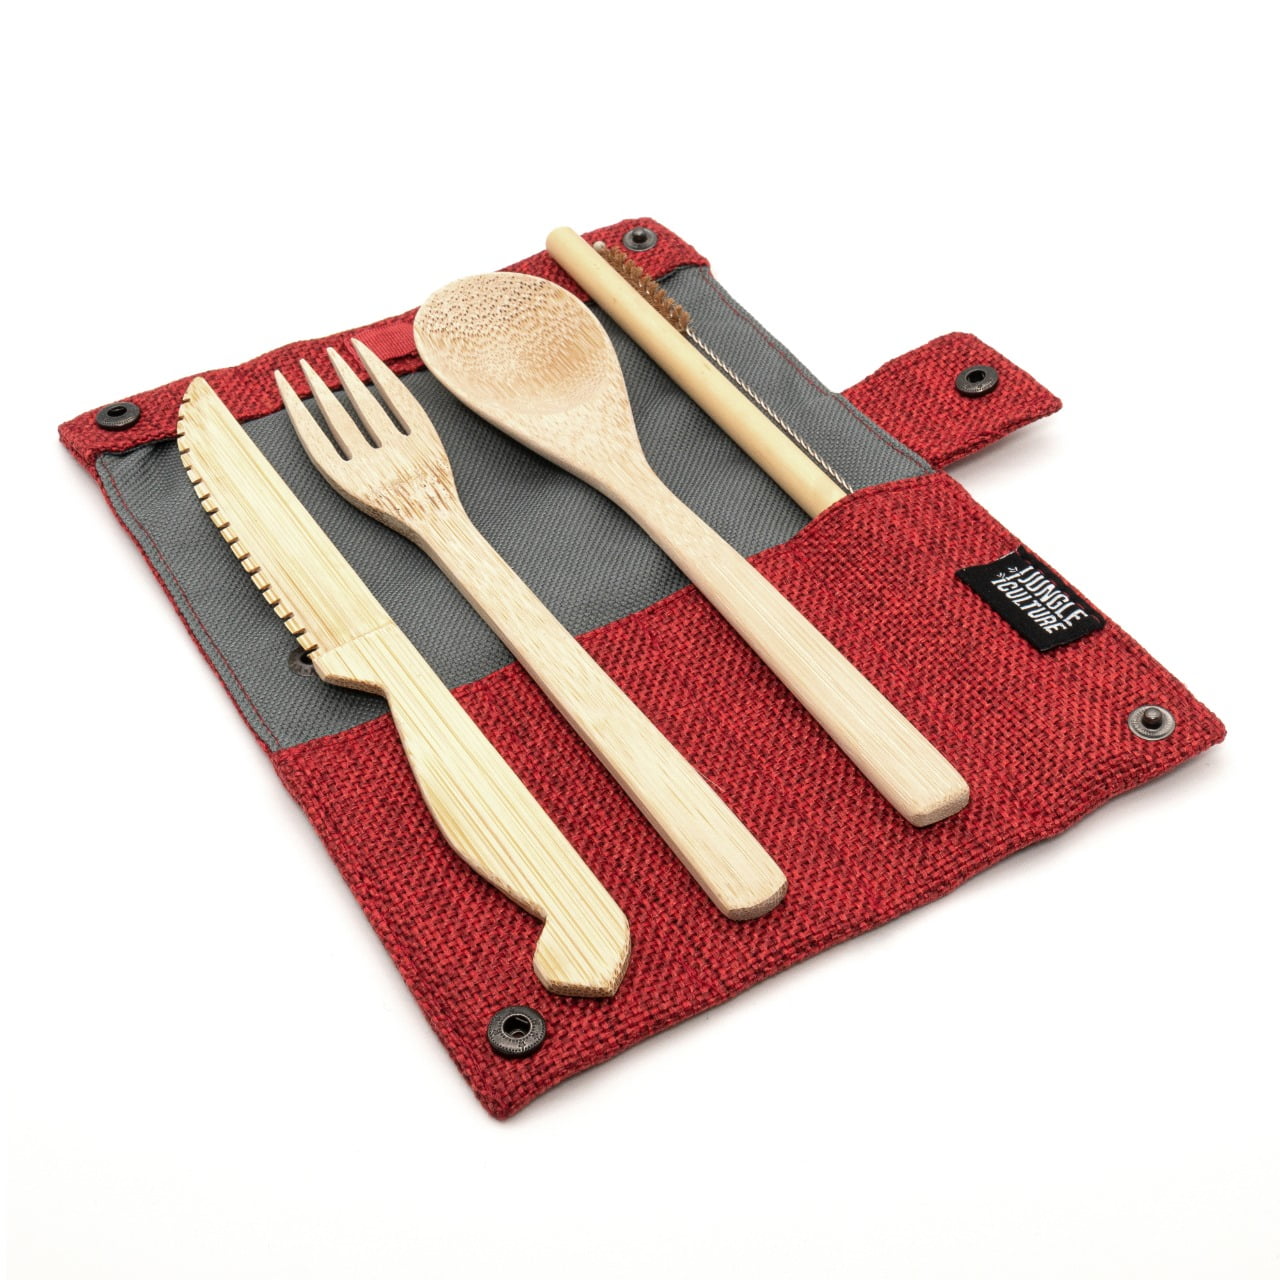 Travel Cutlery Set - red